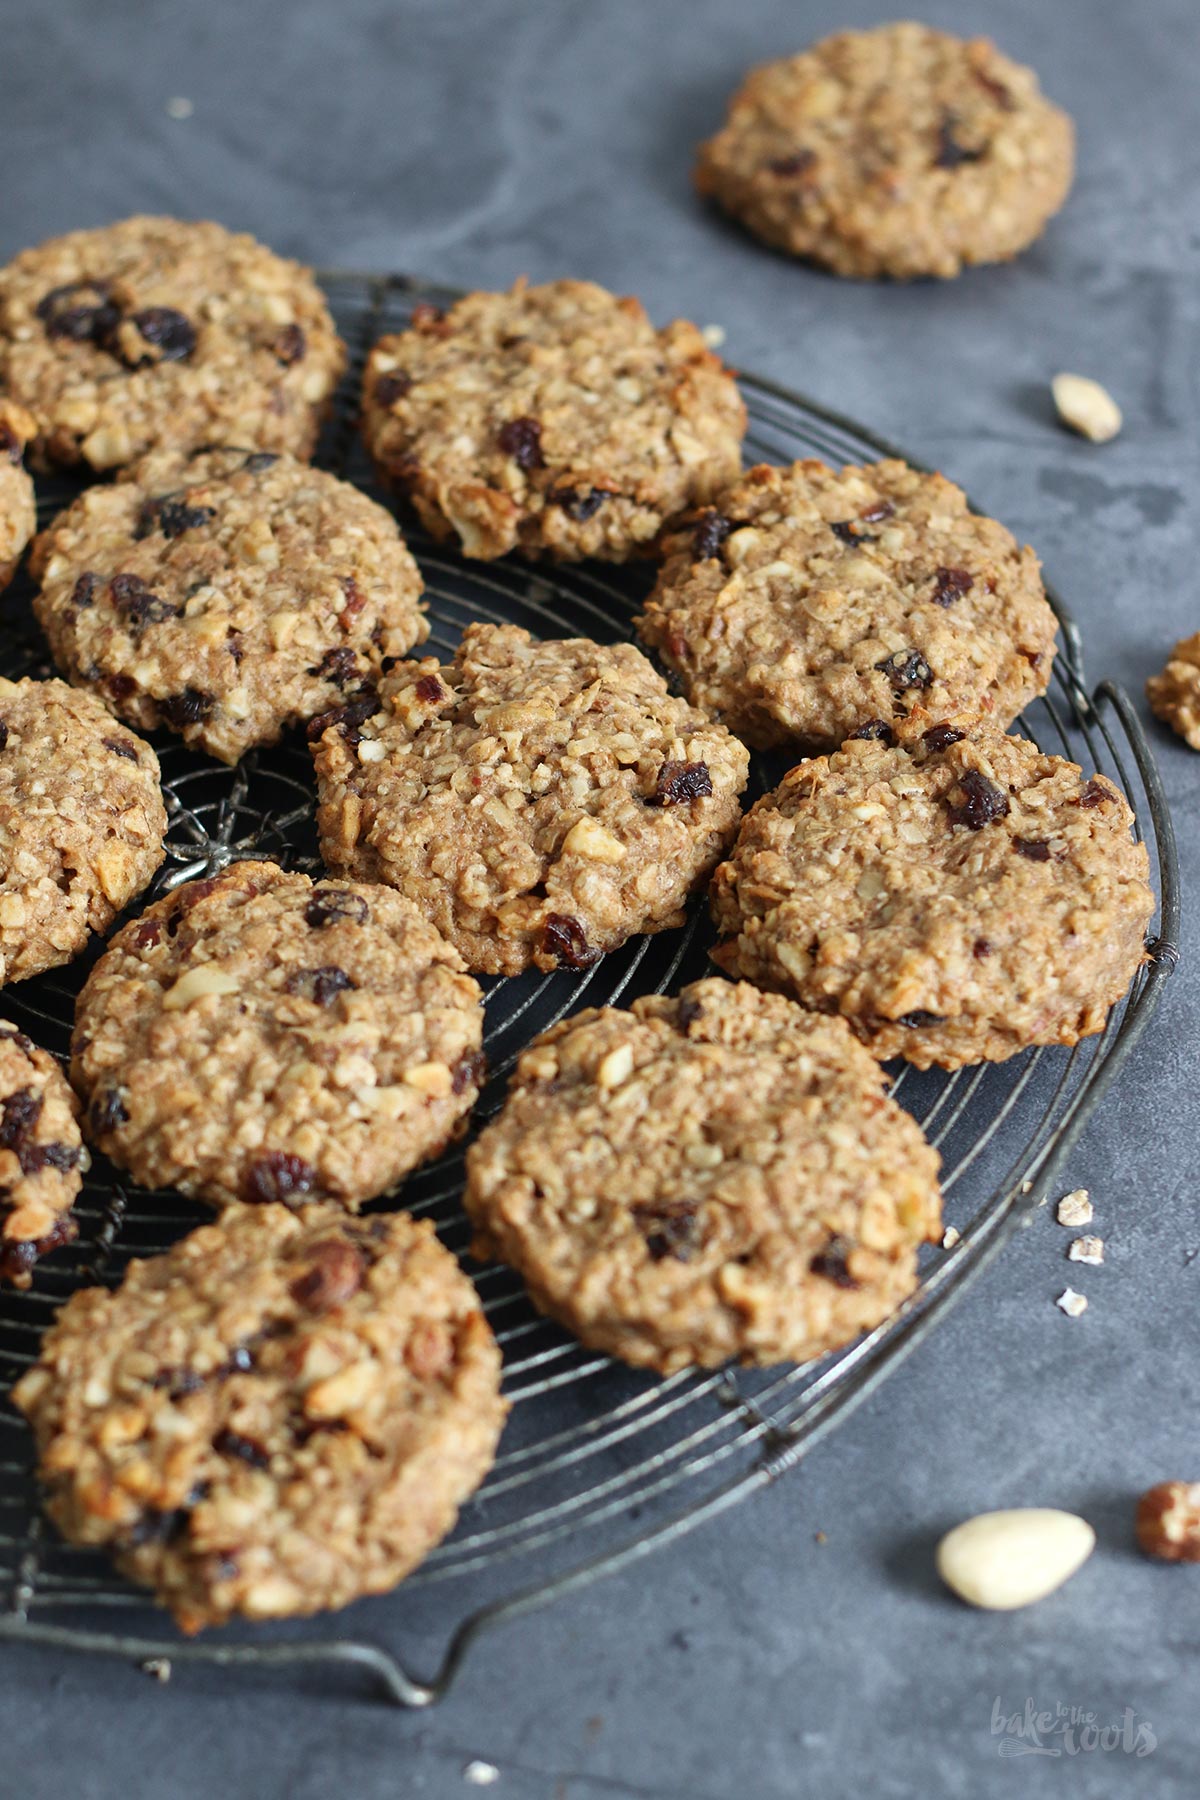 Easy Breakfast Cookies | Bake to the roots